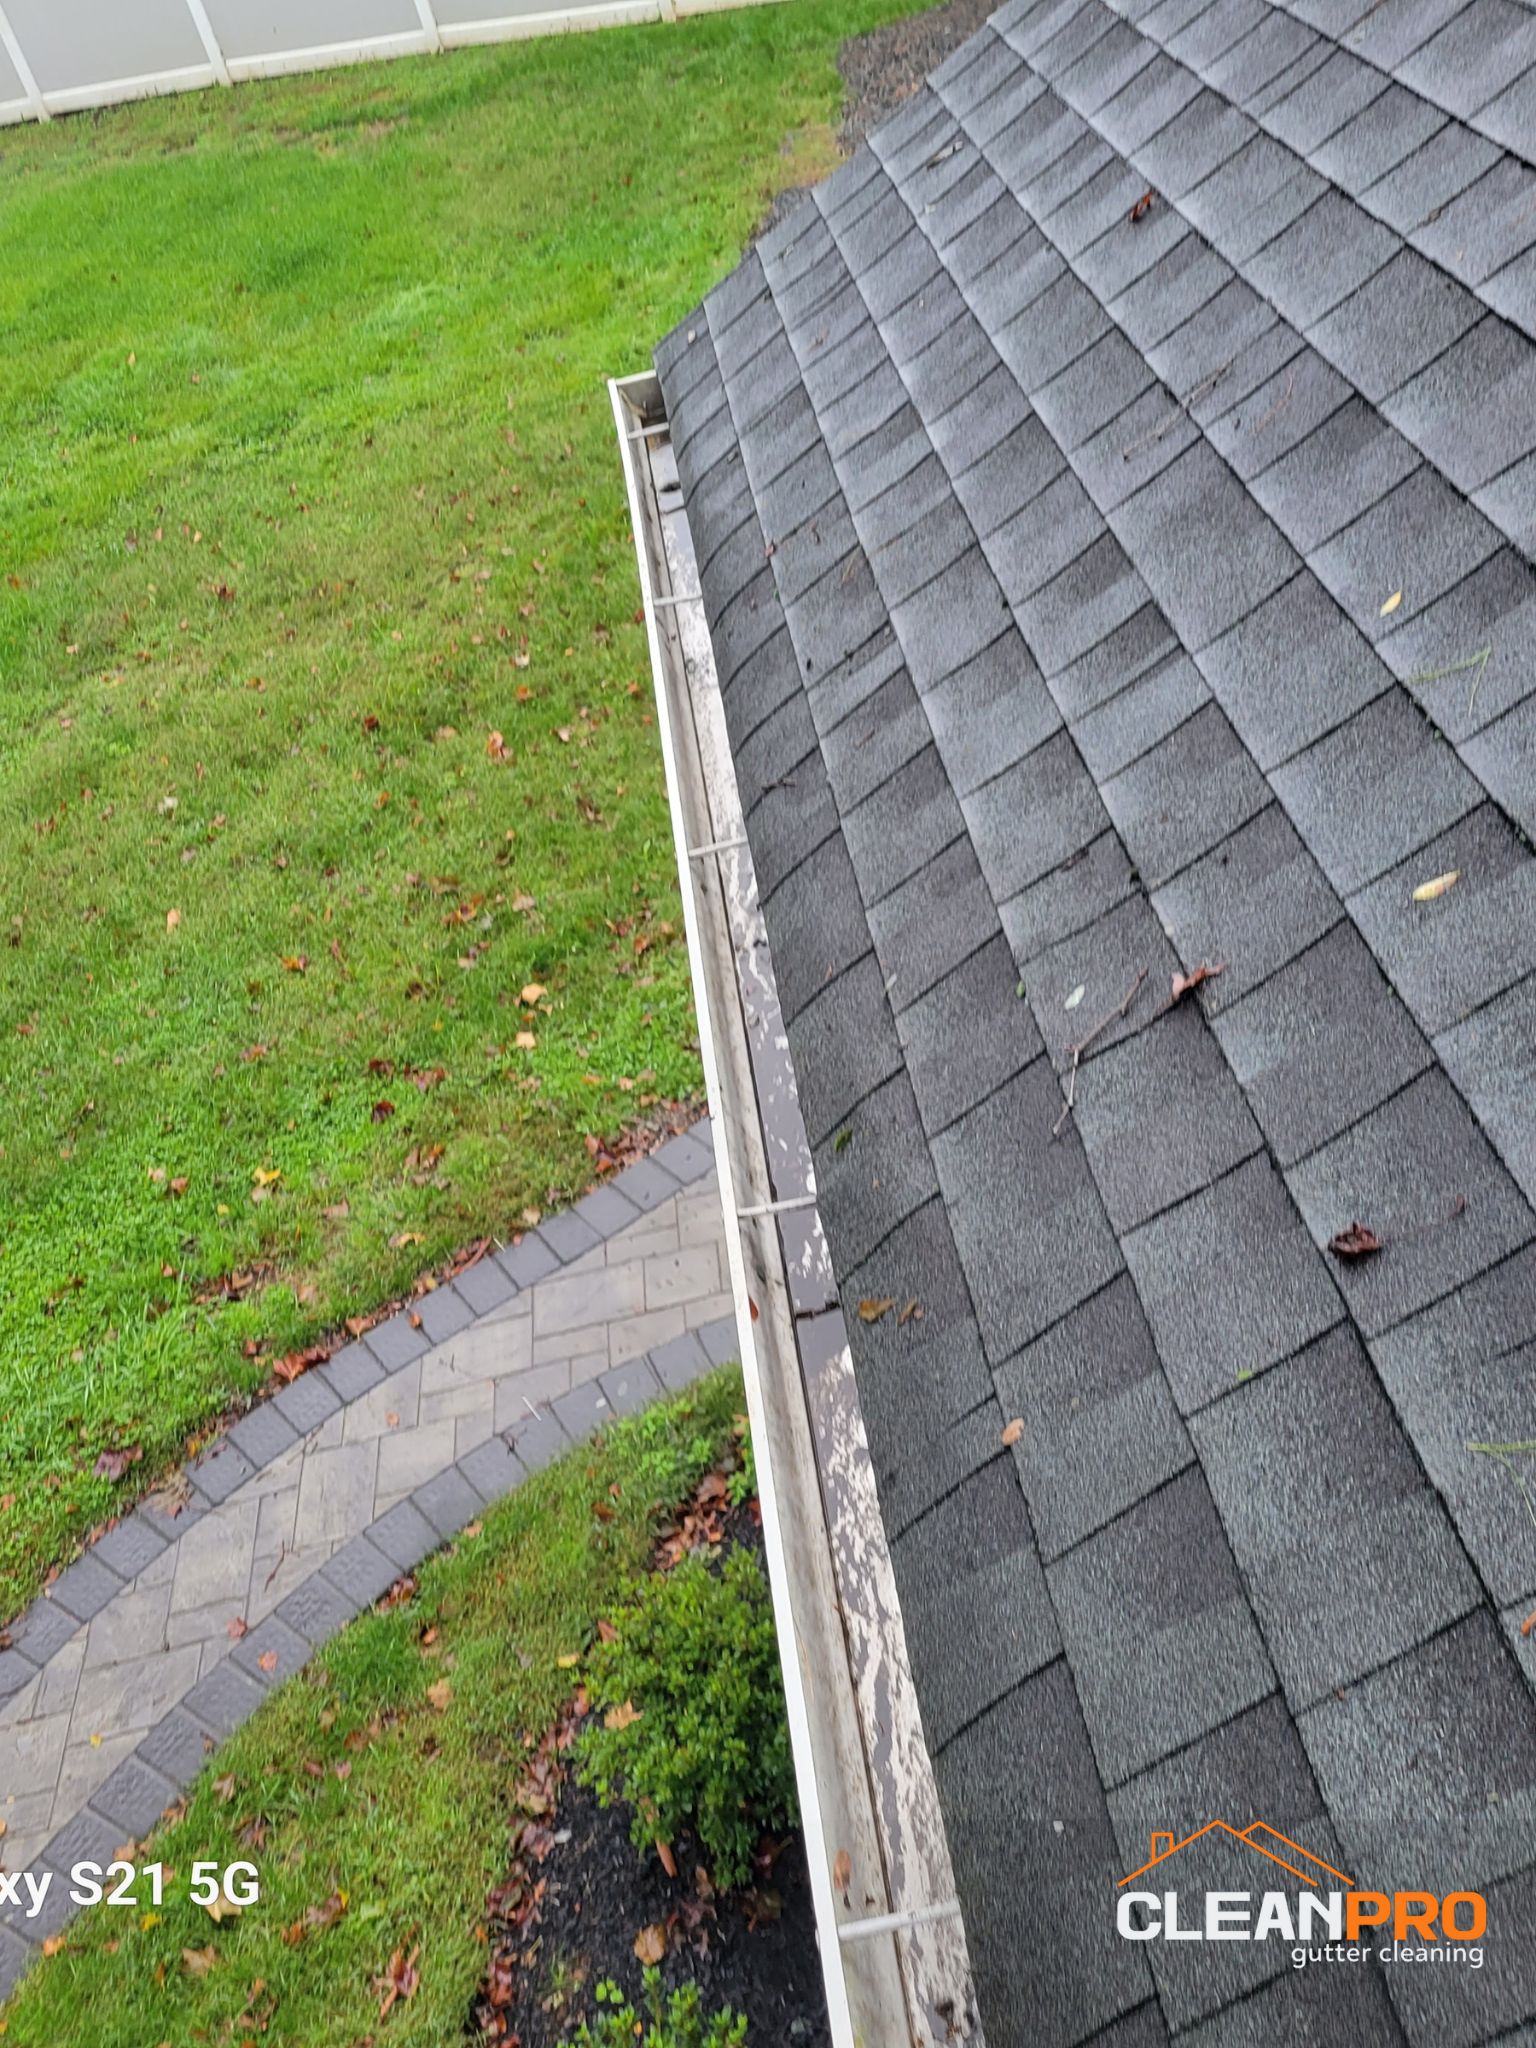 Quality Gutter Cleaning in Asheville NC